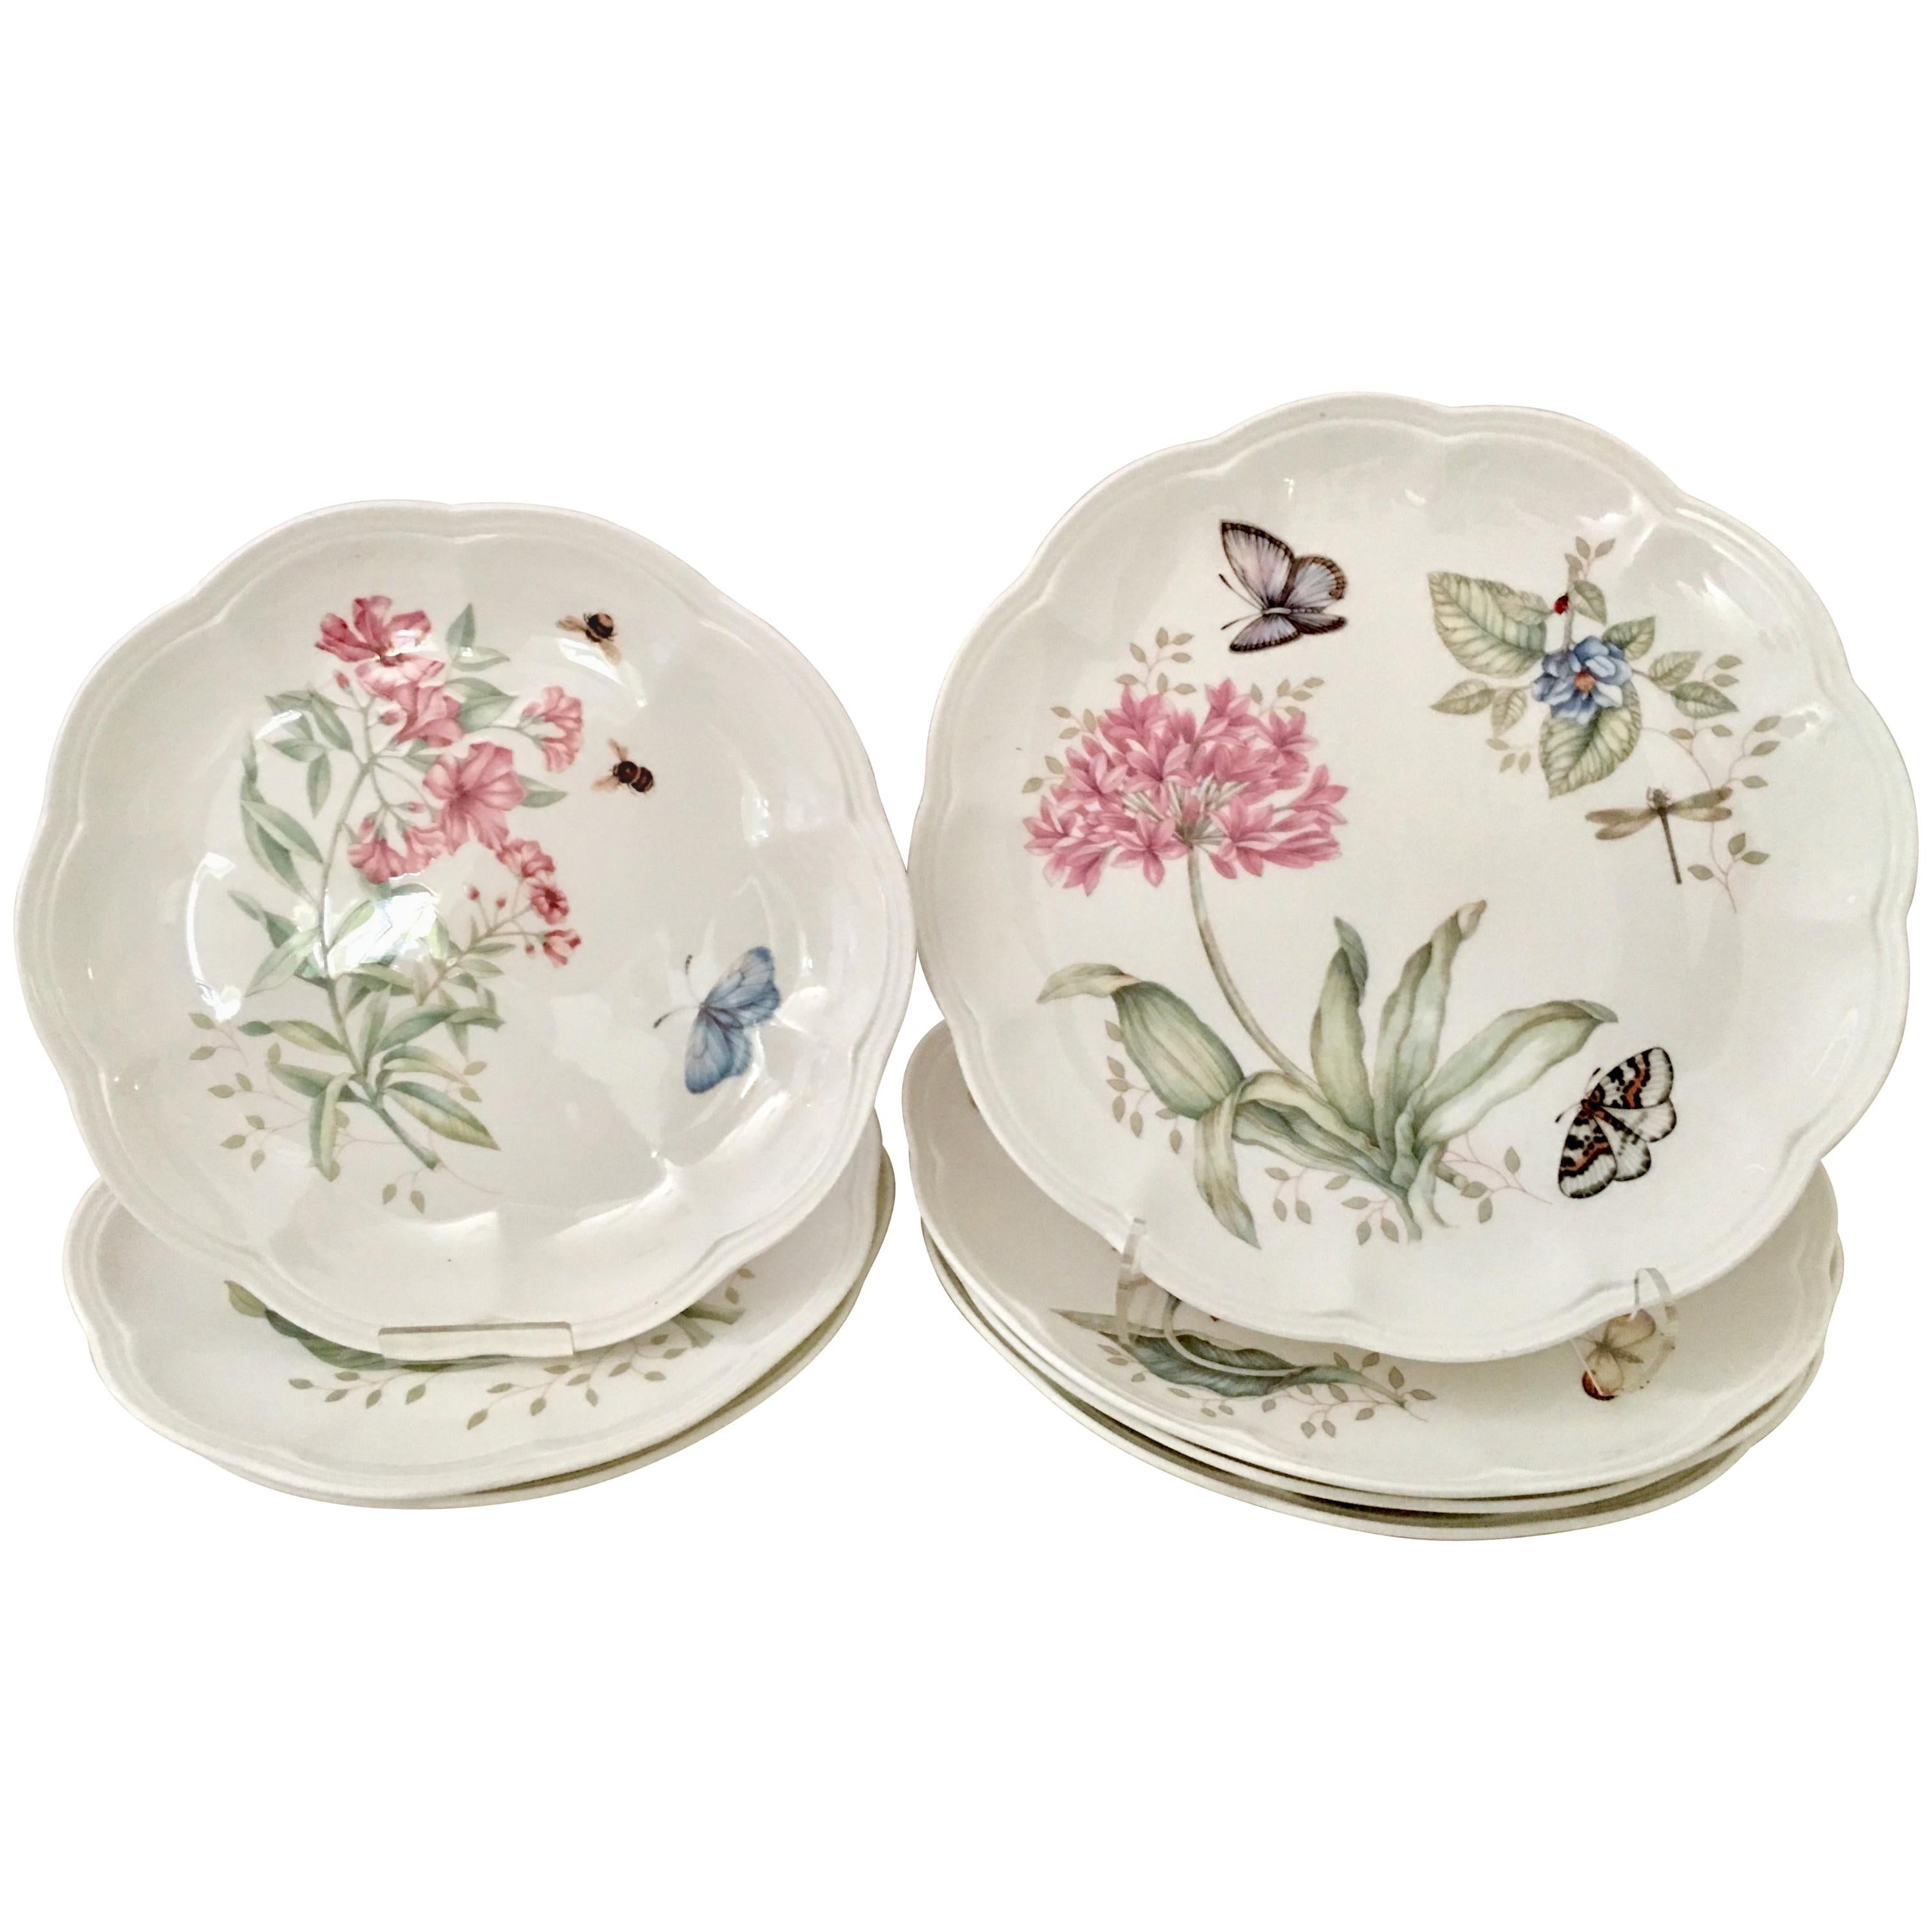 1990s Dinnerware Plates "Butterfly Meadow" Set of Seven by, Lenox For Sale